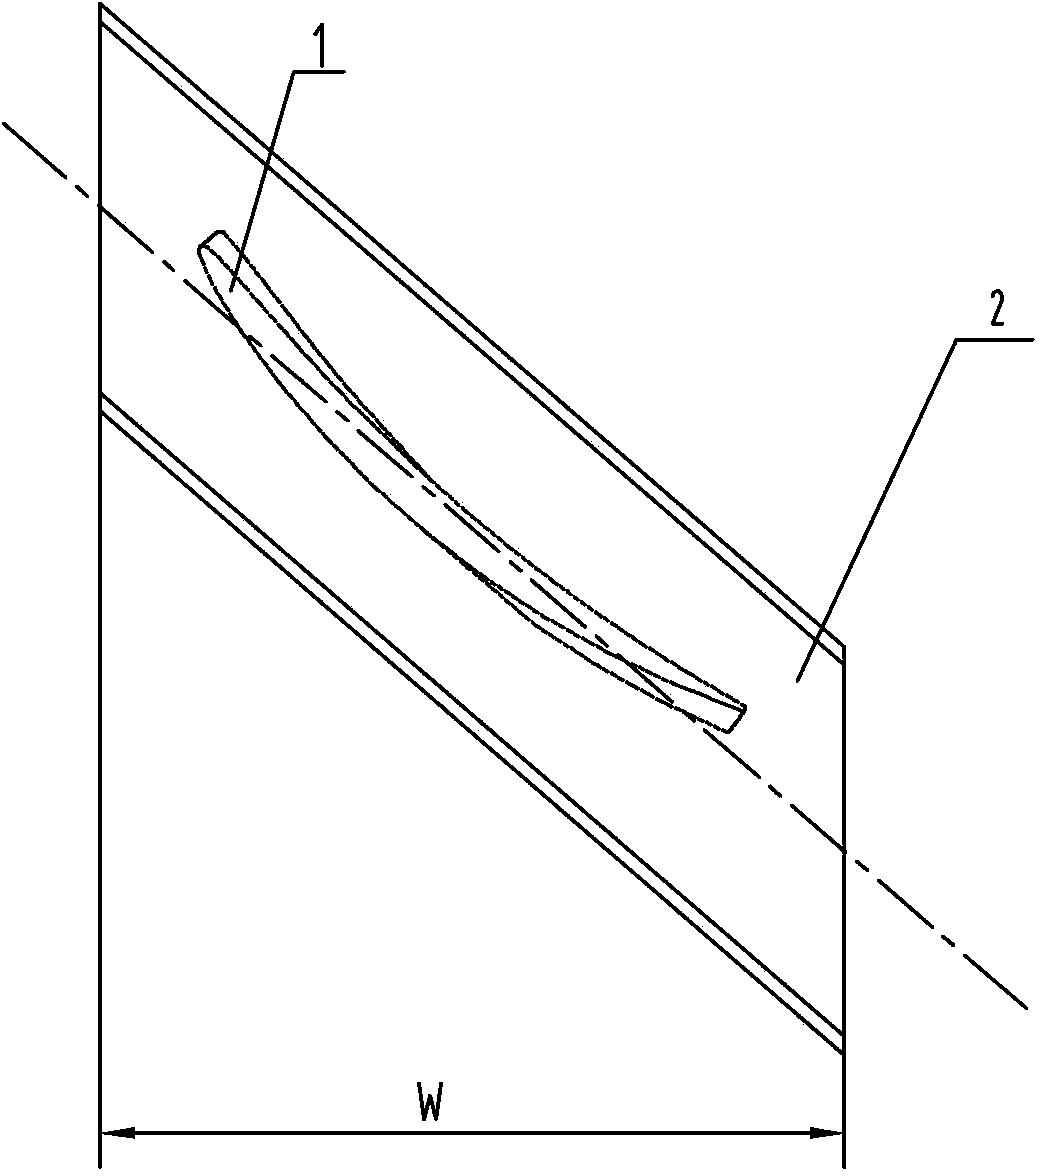 High-pressure intermediate-stage guide blade of gas compressor for combustion gas turbine